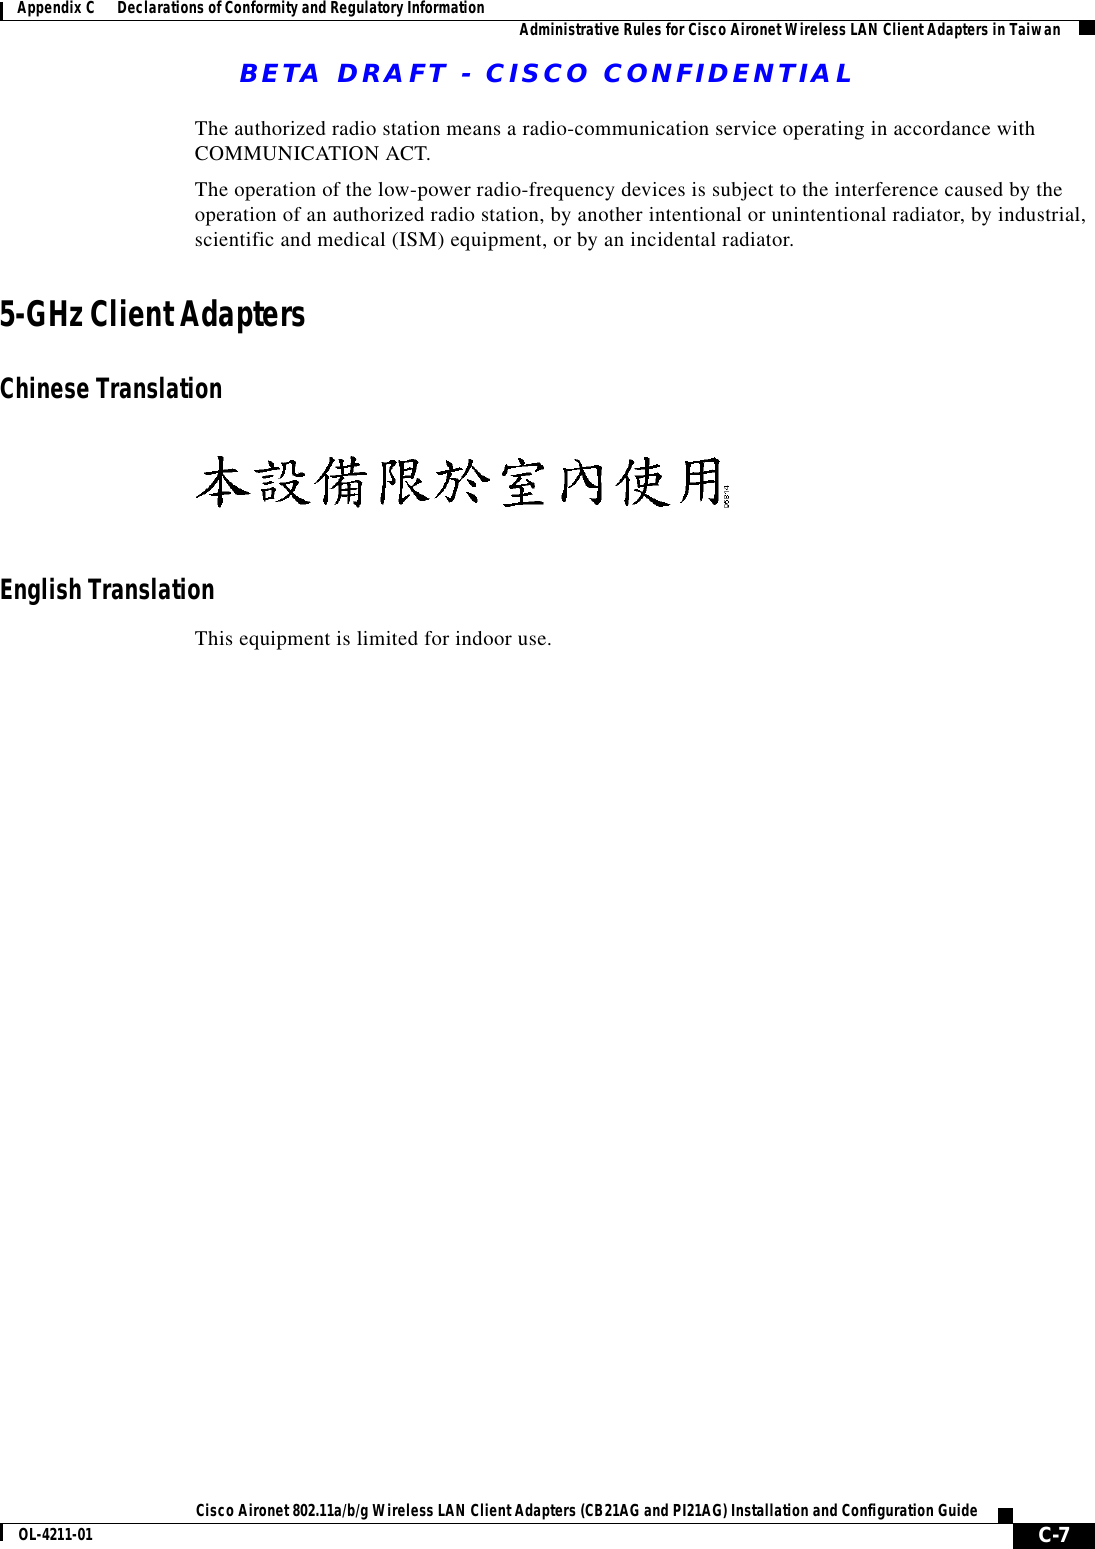 BETA DRAFT - CISCO CONFIDENTIAL C-7Cisco Aironet 802.11a/b/g Wireless LAN Client Adapters (CB21AG and PI21AG) Installation and Configuration GuideOL-4211-01Appendix C      Declarations of Conformity and Regulatory Information Administrative Rules for Cisco Aironet Wireless LAN Client Adapters in TaiwanThe authorized radio station means a radio-communication service operating in accordance with COMMUNICATION ACT. The operation of the low-power radio-frequency devices is subject to the interference caused by the operation of an authorized radio station, by another intentional or unintentional radiator, by industrial, scientific and medical (ISM) equipment, or by an incidental radiator.5-GHz Client Adapters Chinese TranslationEnglish TranslationThis equipment is limited for indoor use.